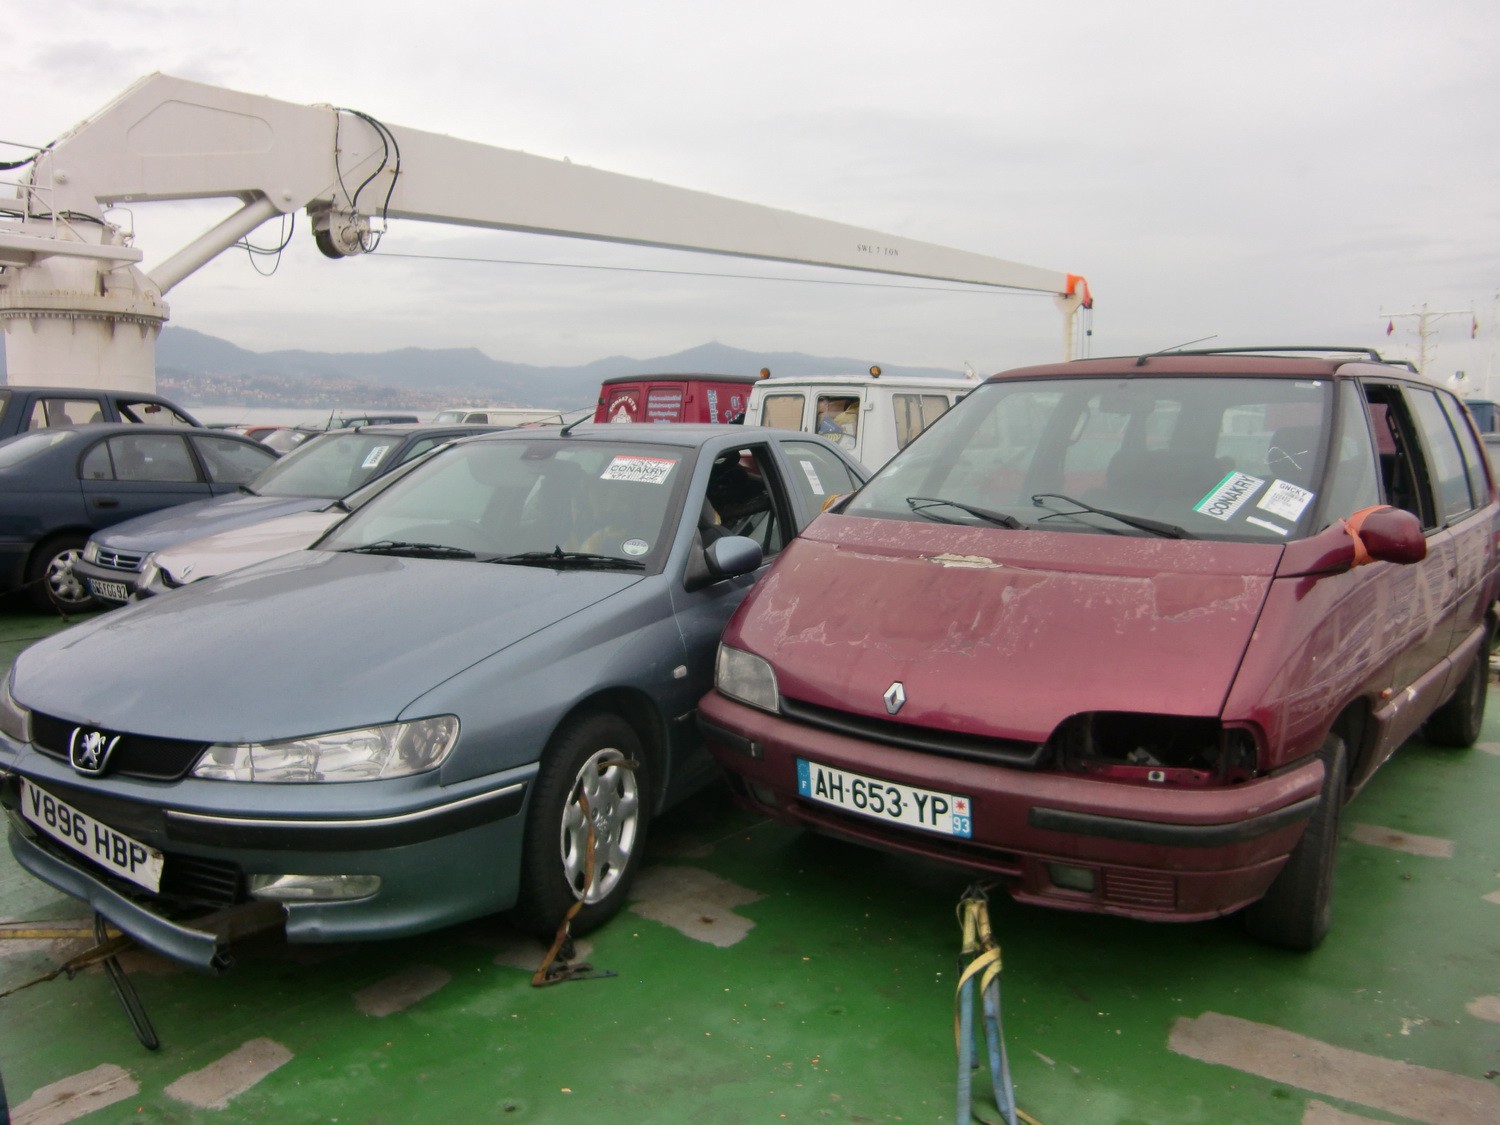 Status of some 2nd hand cars, after we crossed the stormy Gulf of Biscaya